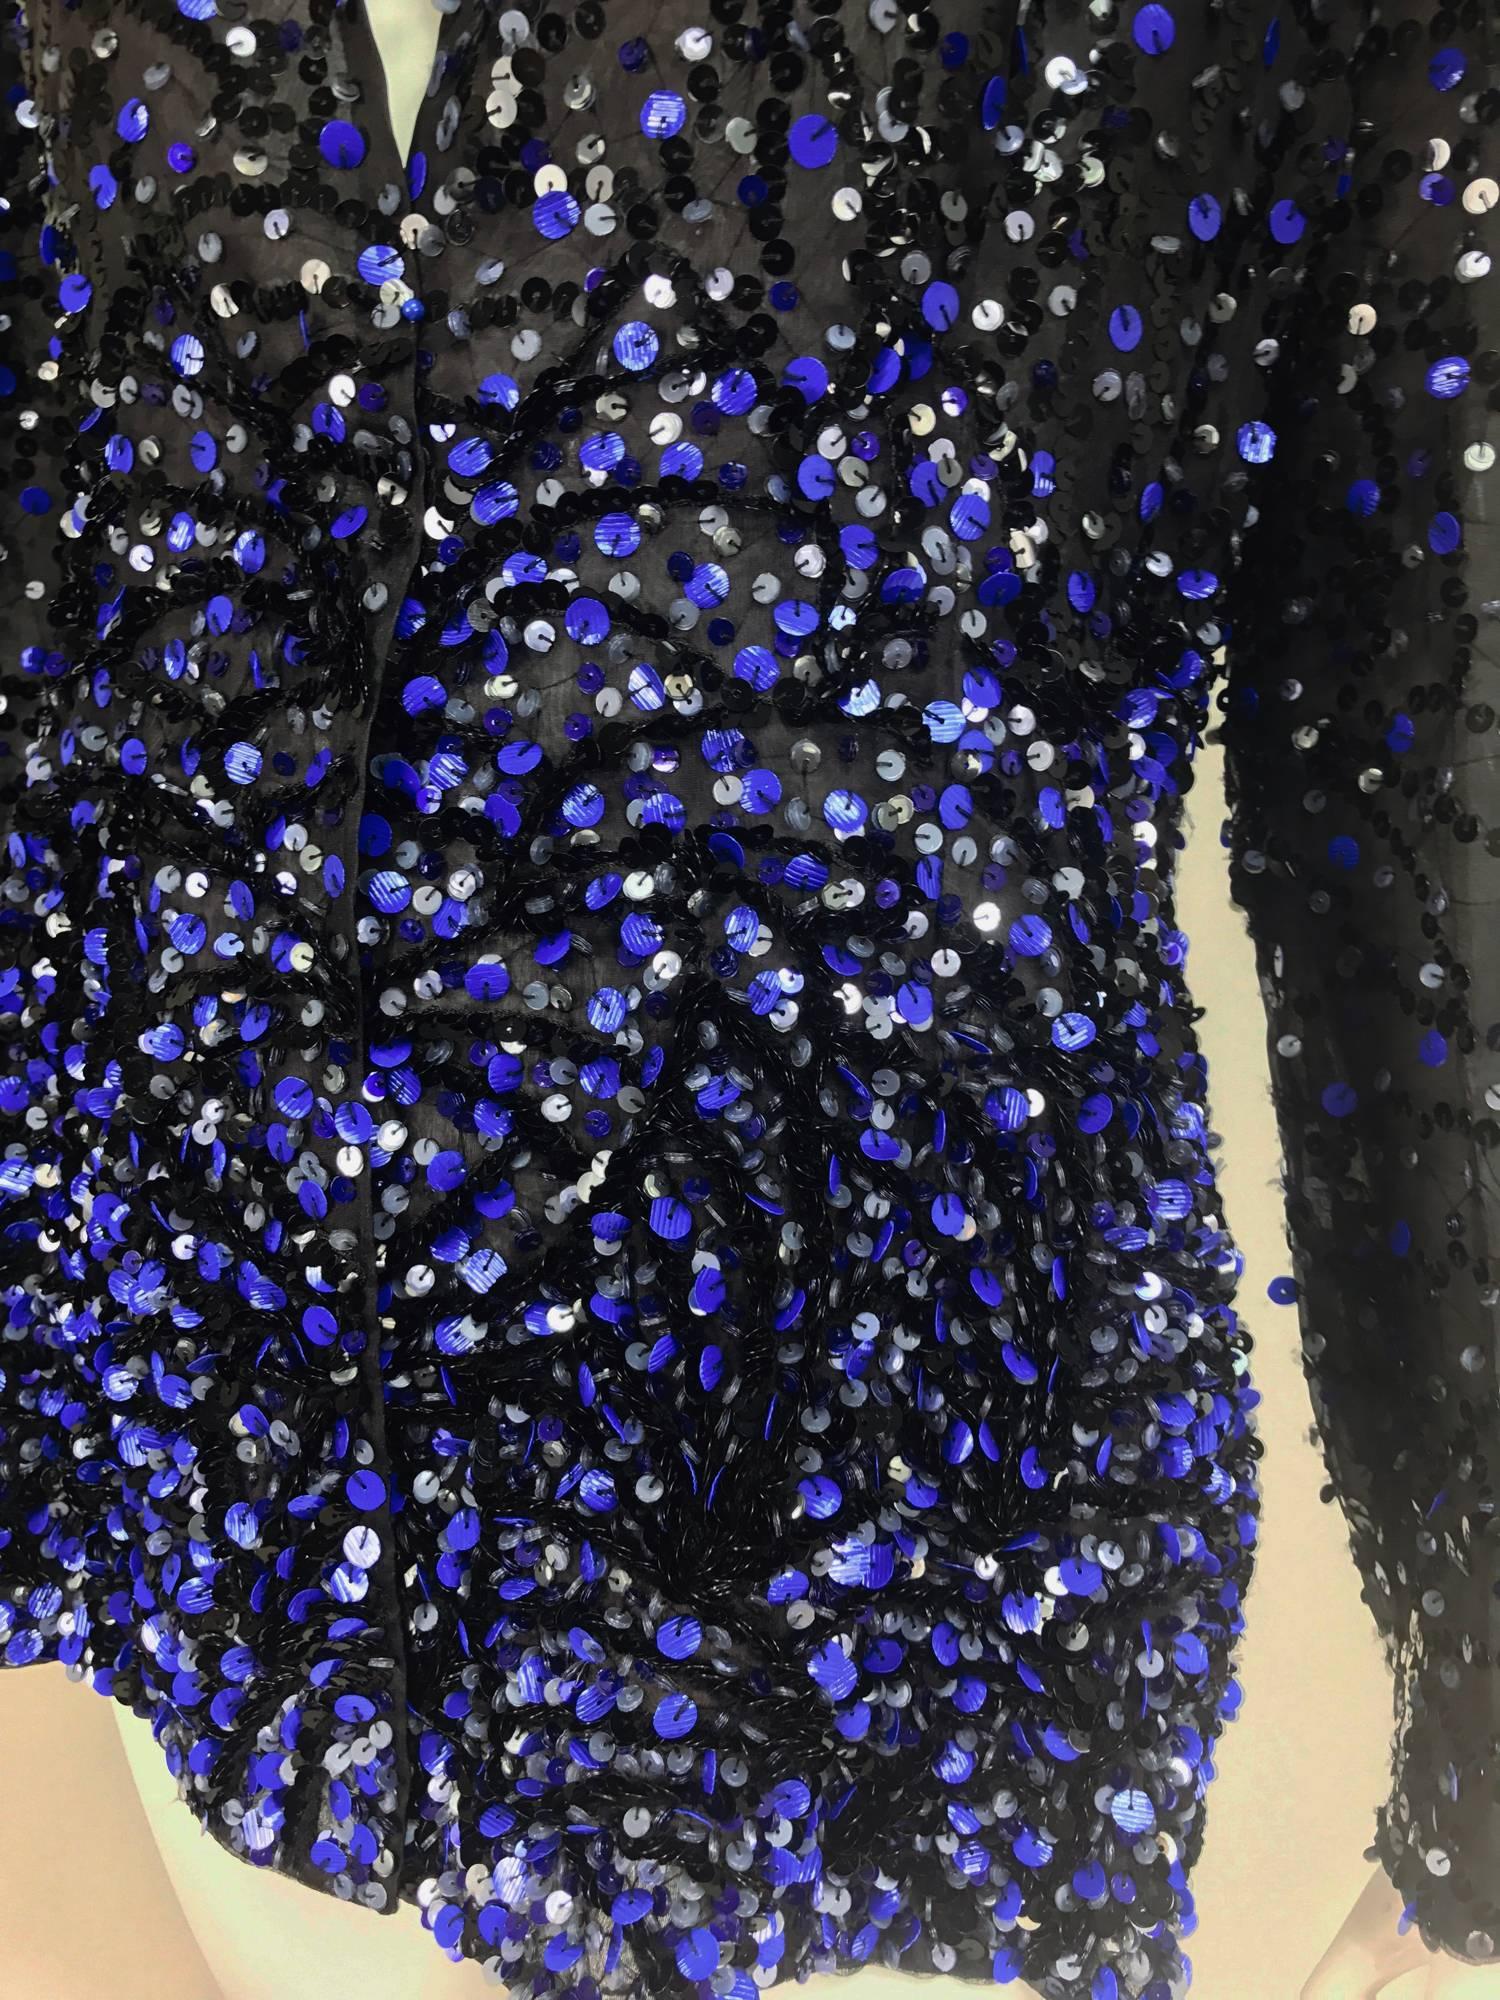 Glittery black and blue sequins embroidered on a black silk organza jacket...Long sleeves narrow band collar...Jacket is open at the front...Fully lined in silk organza...Shaped at the waist and fits over the hips...Unworn with tags...Marked size 10